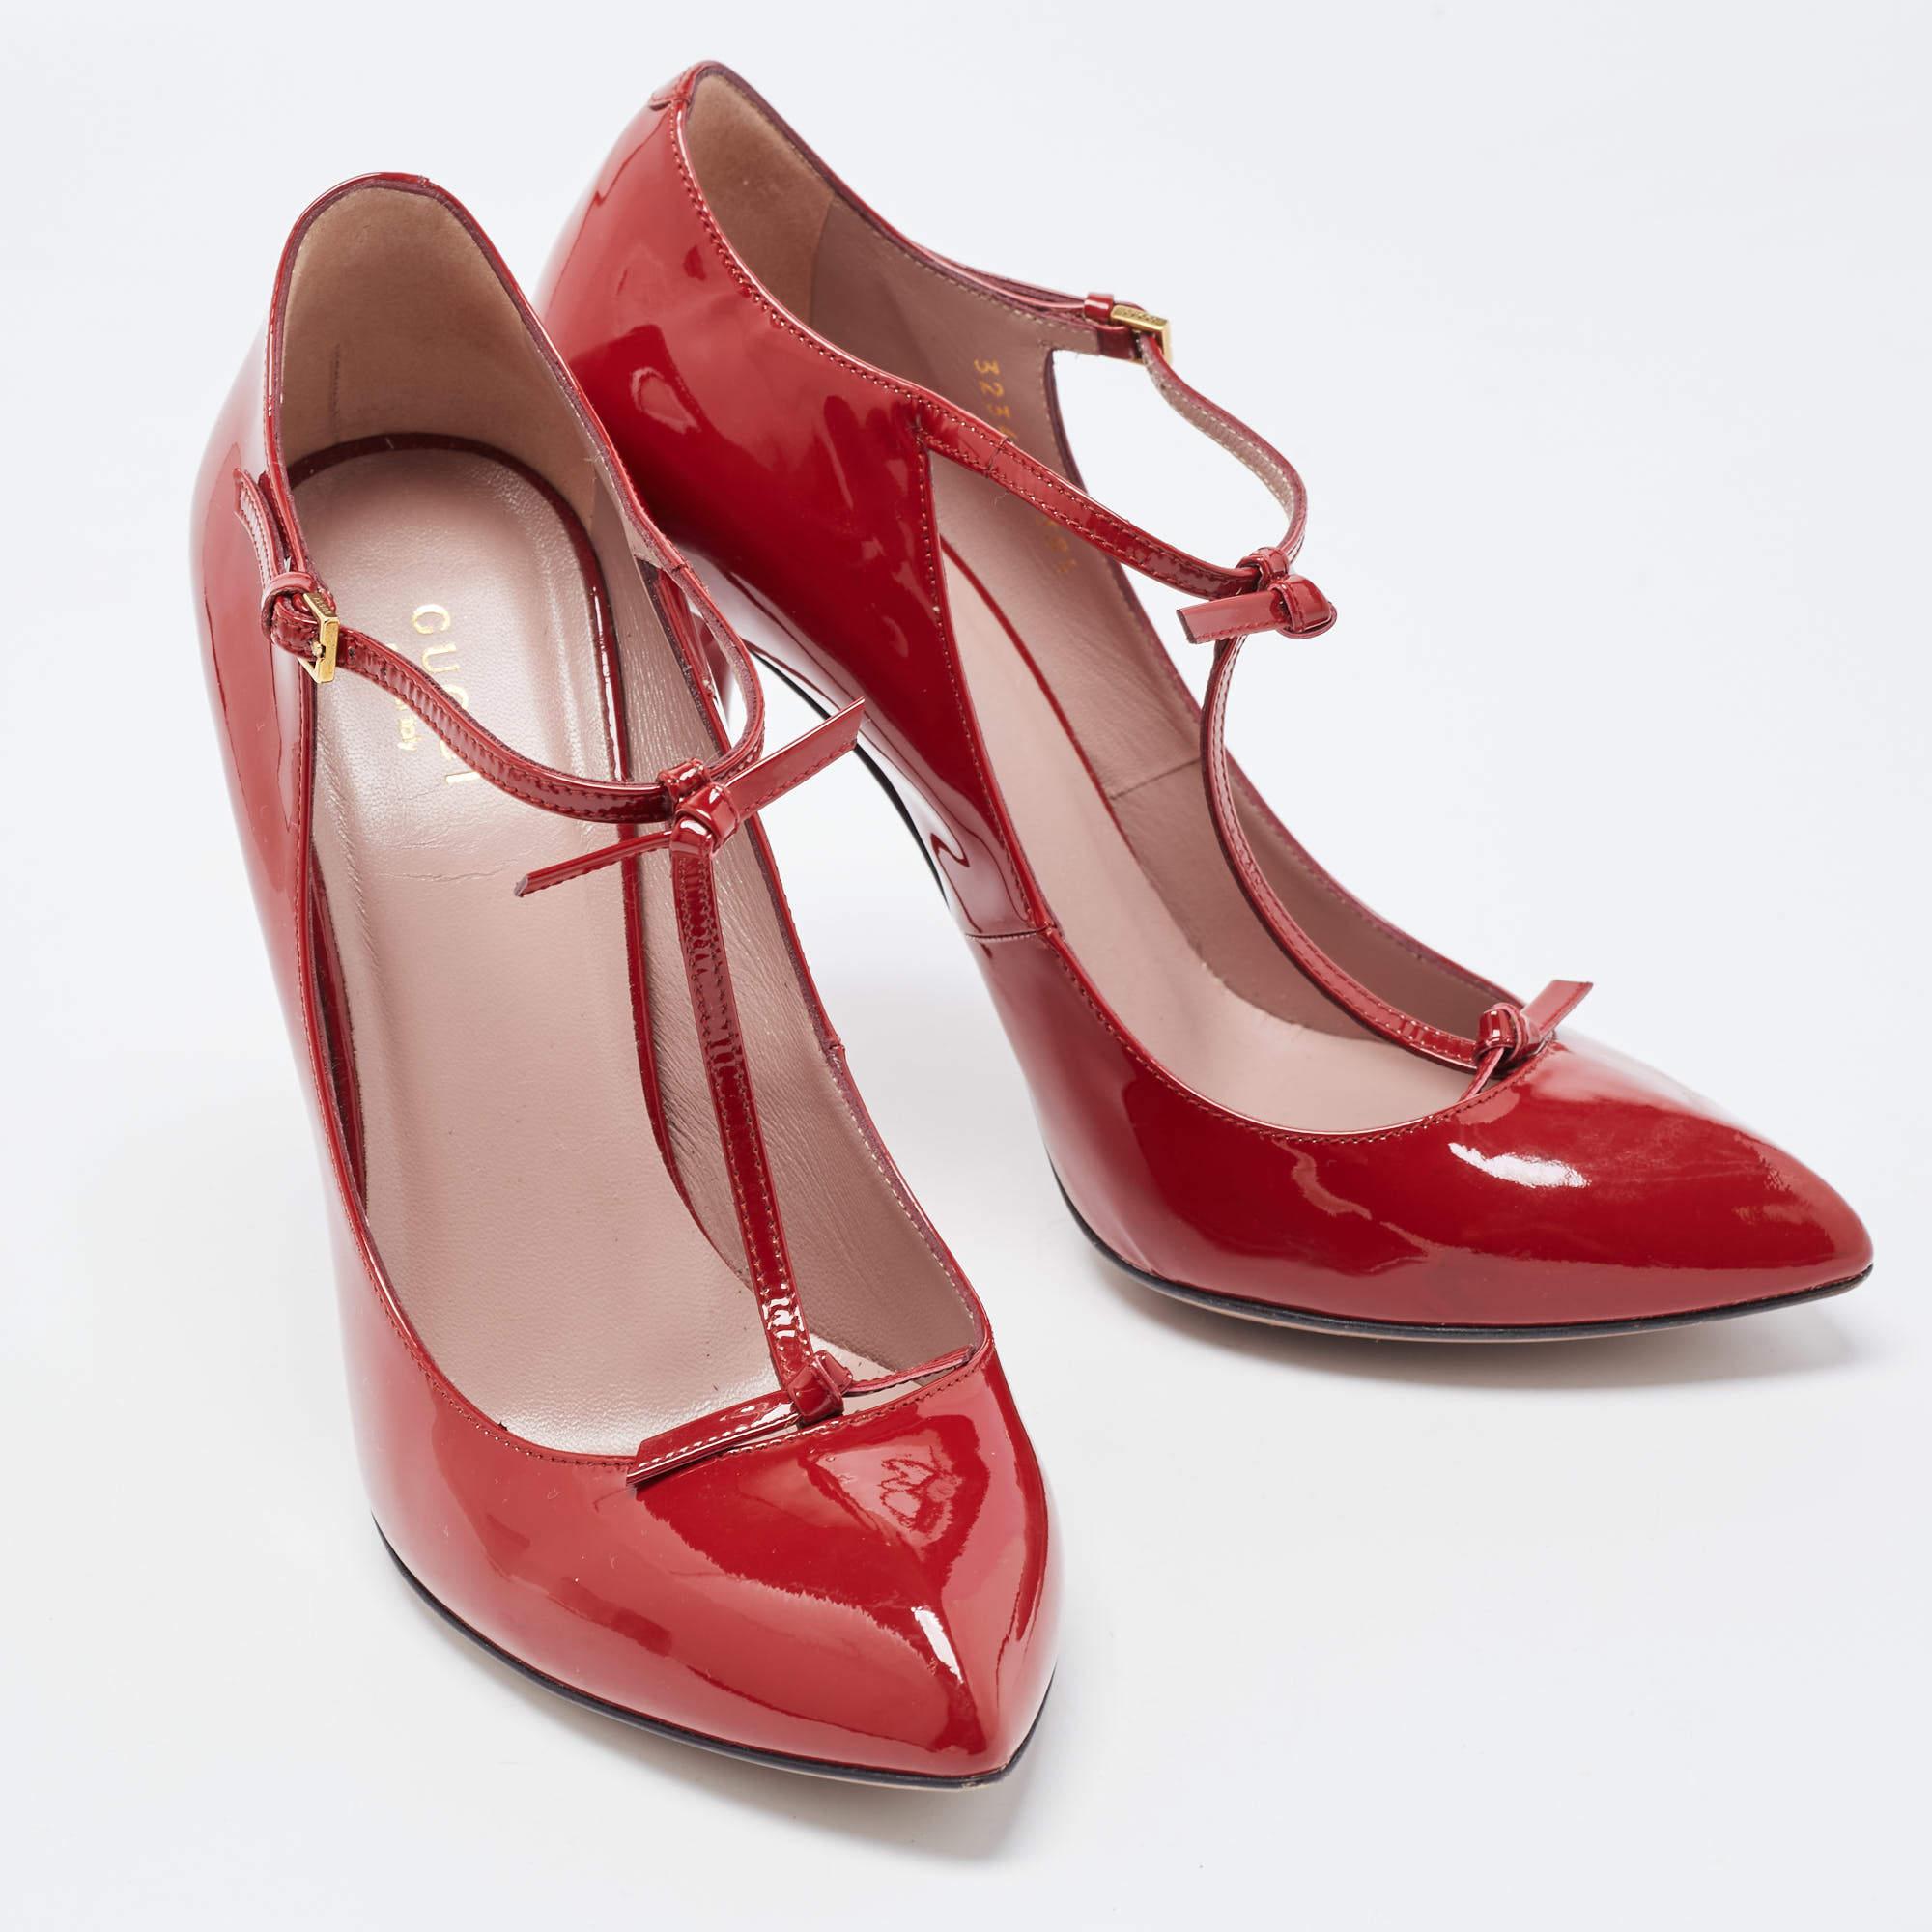 Gucci Red Patent Leather Bow Accents T-Strap Pumps Size 38.5 For Sale 2